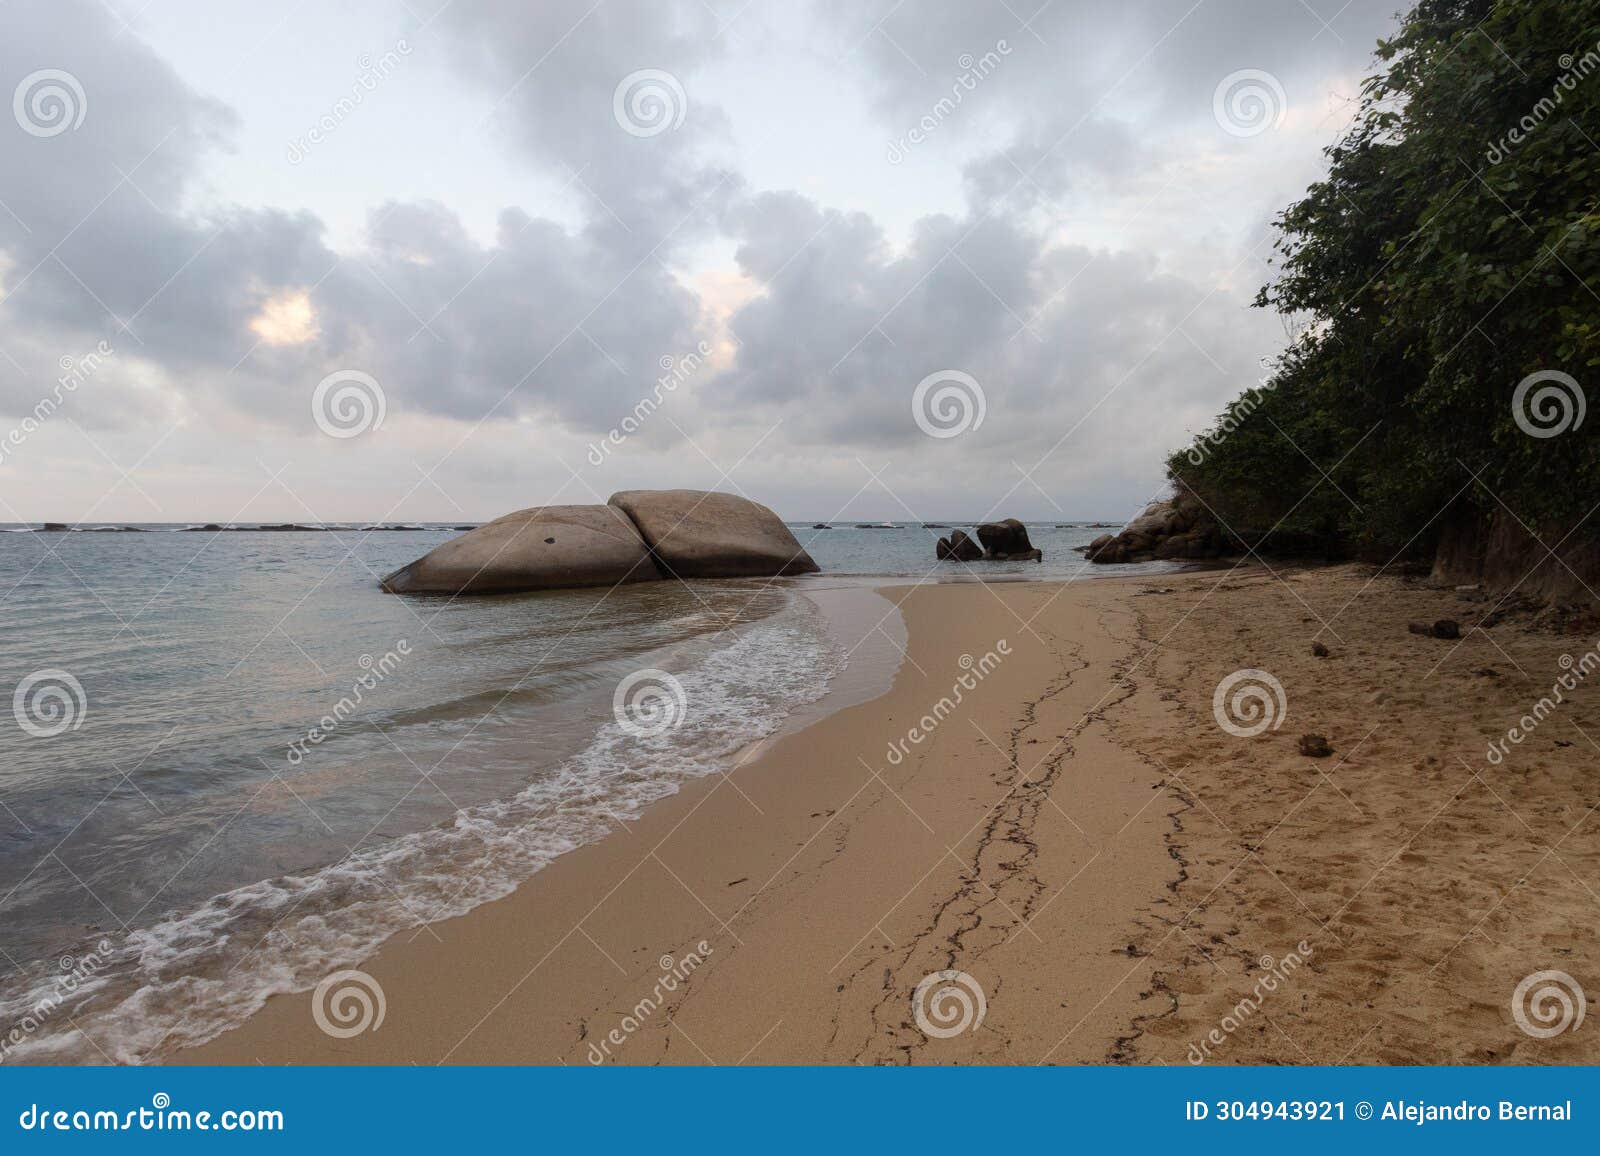 two big rocks in la piscina beach located into tayrona park with orange sunset